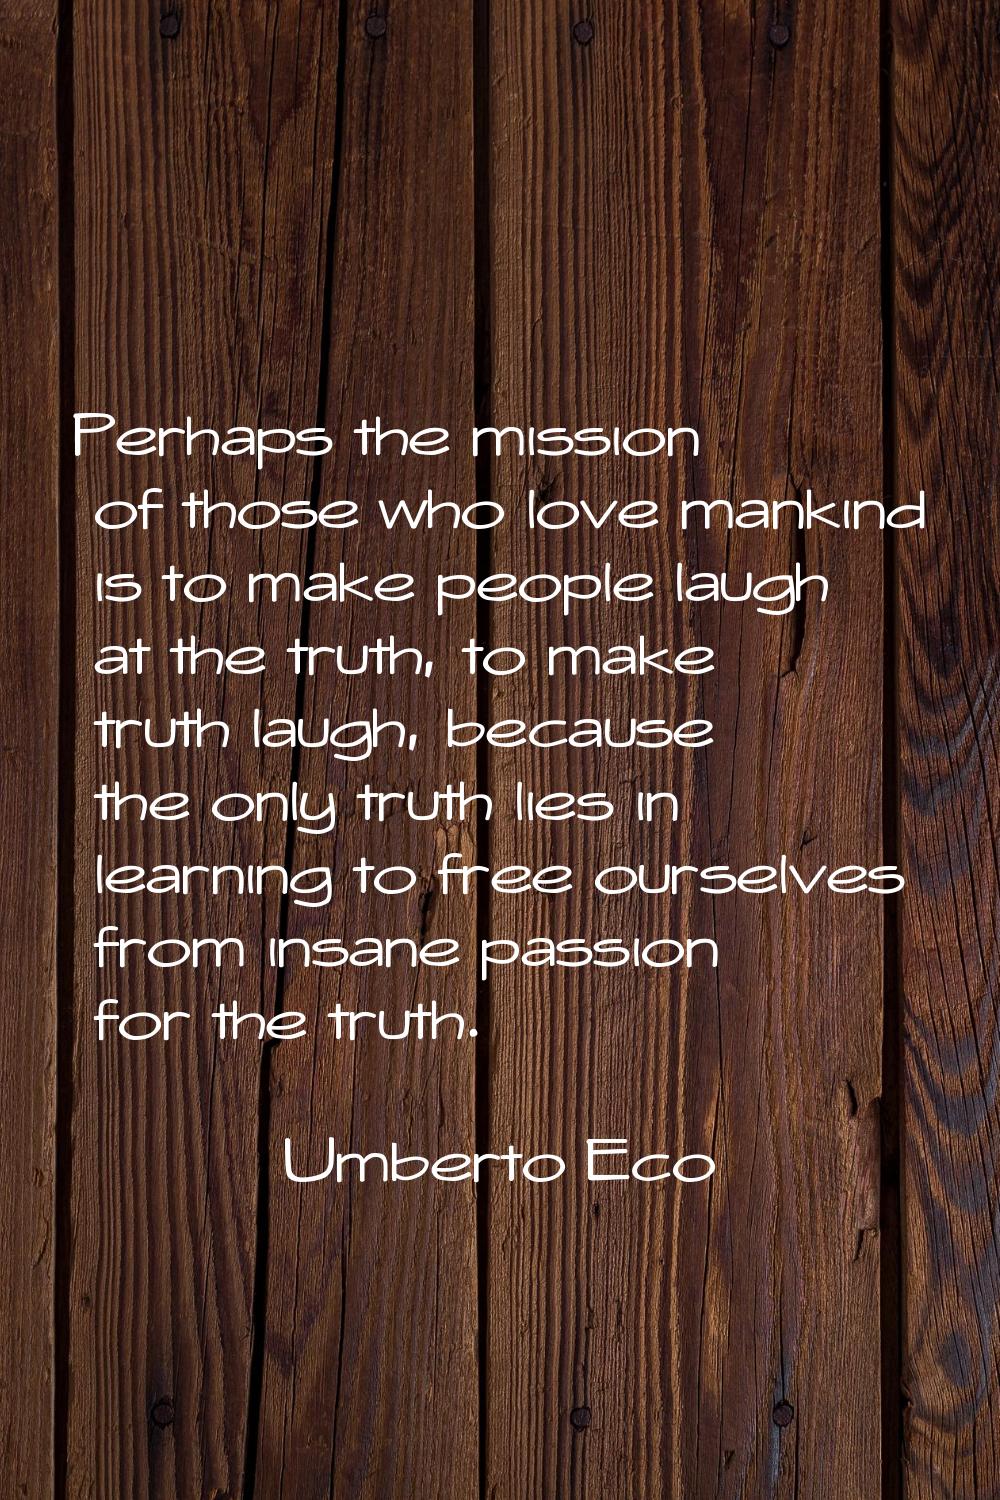 Perhaps the mission of those who love mankind is to make people laugh at the truth, to make truth l